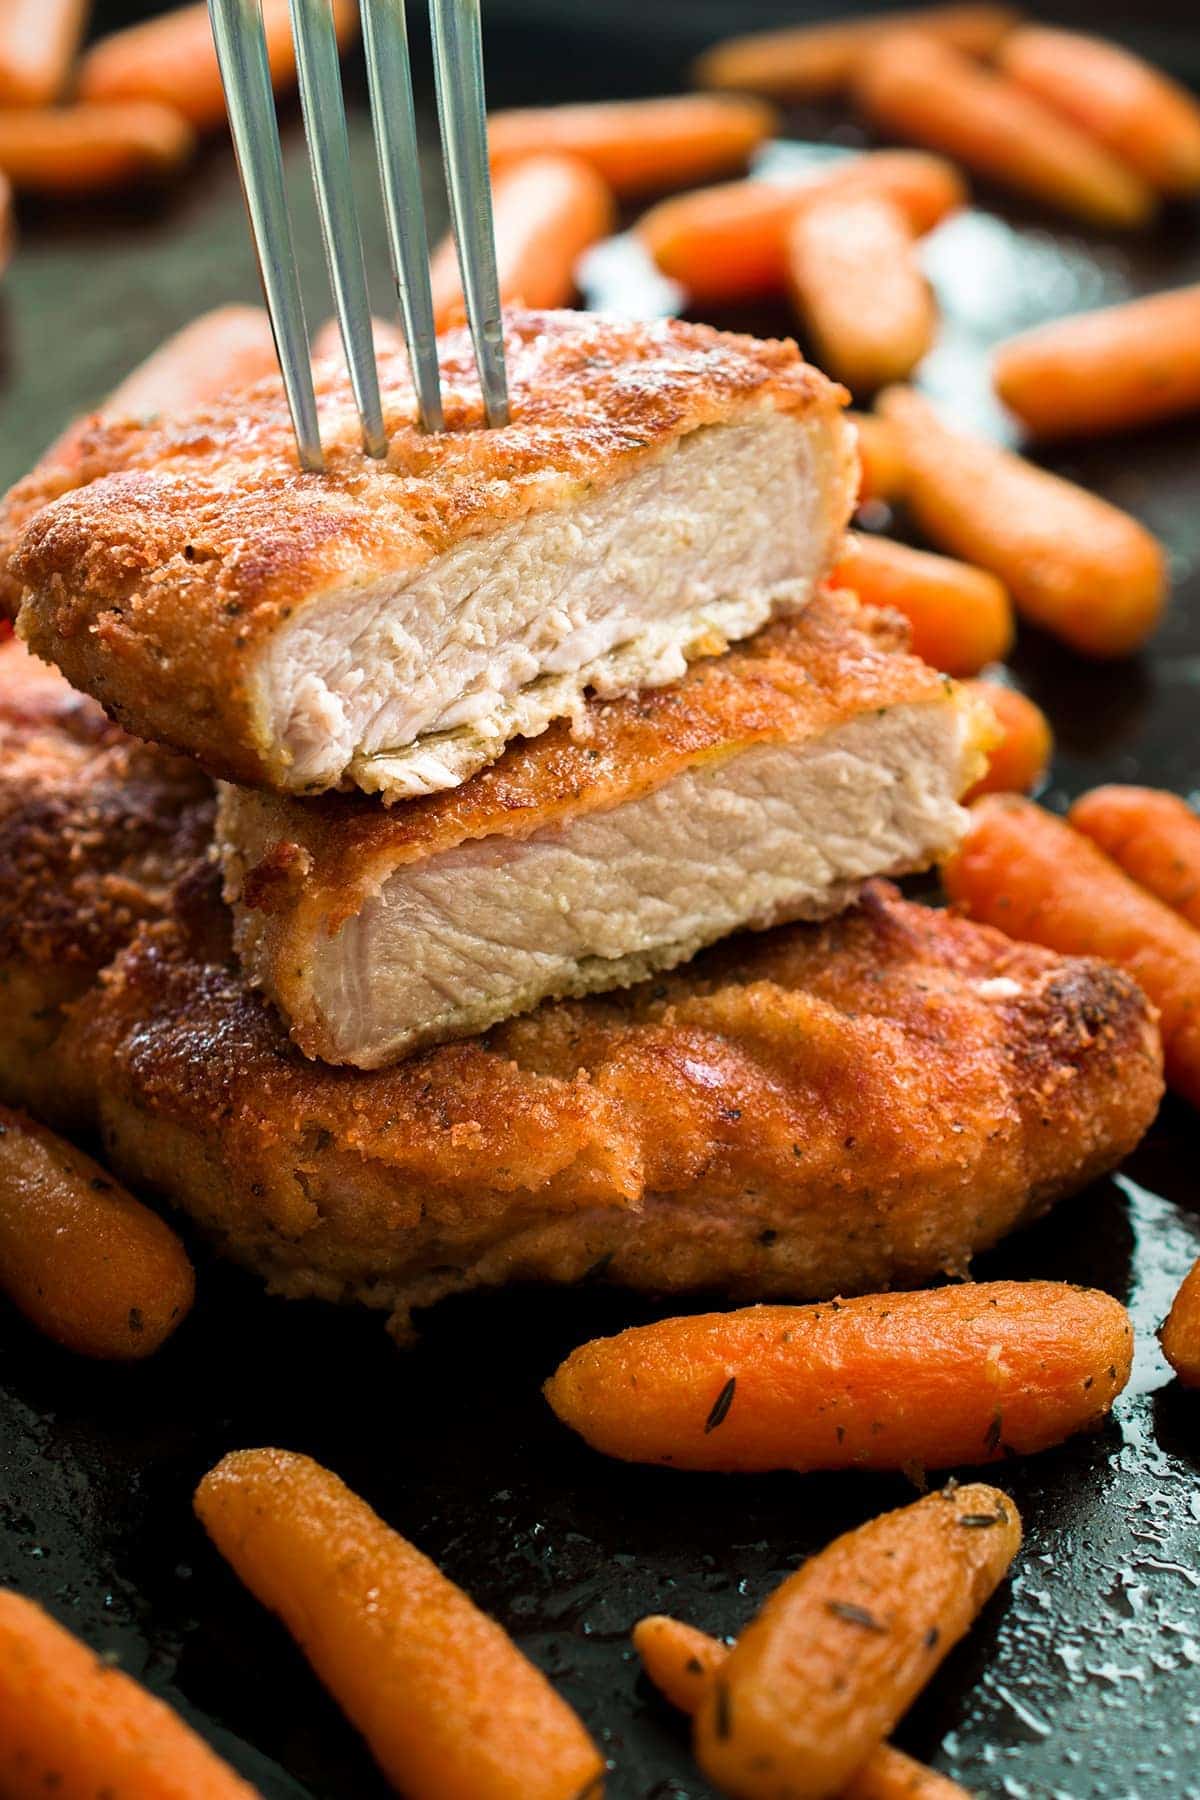 Breaded baked pork chops with baby carrots. Top pork chop sliced in half with fork piercing through it.